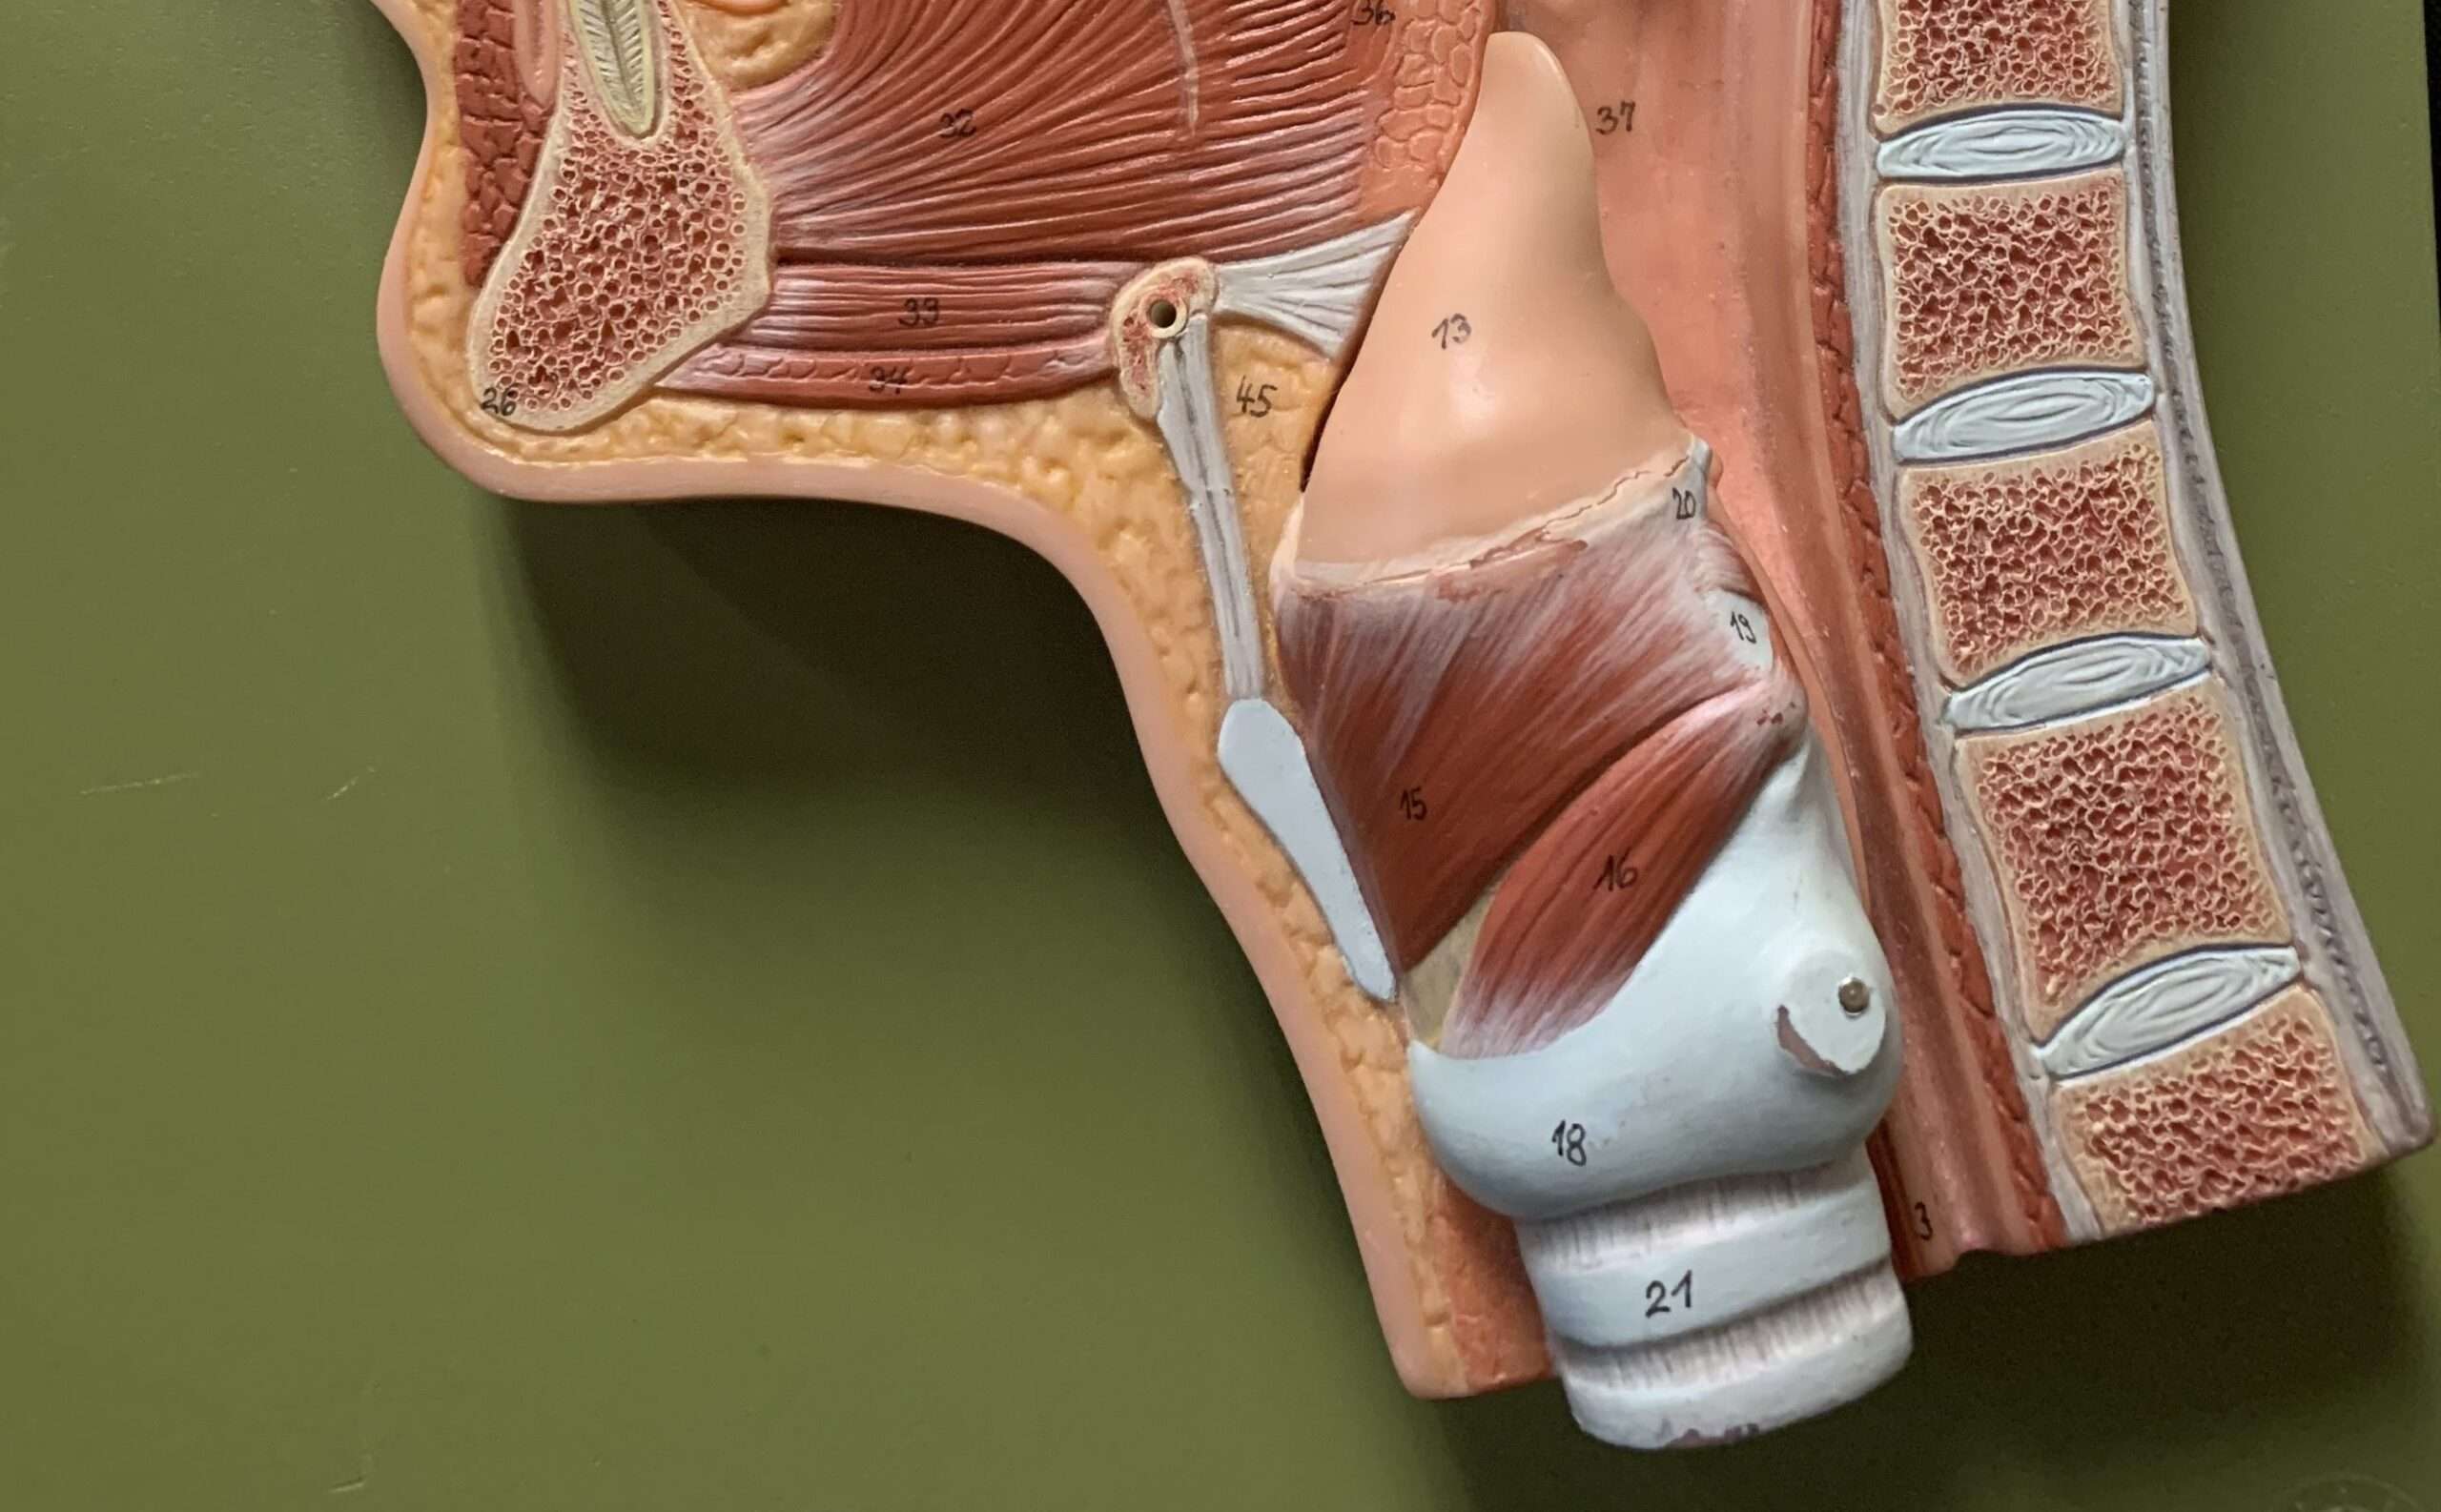 Model of larynx and its location in the neck